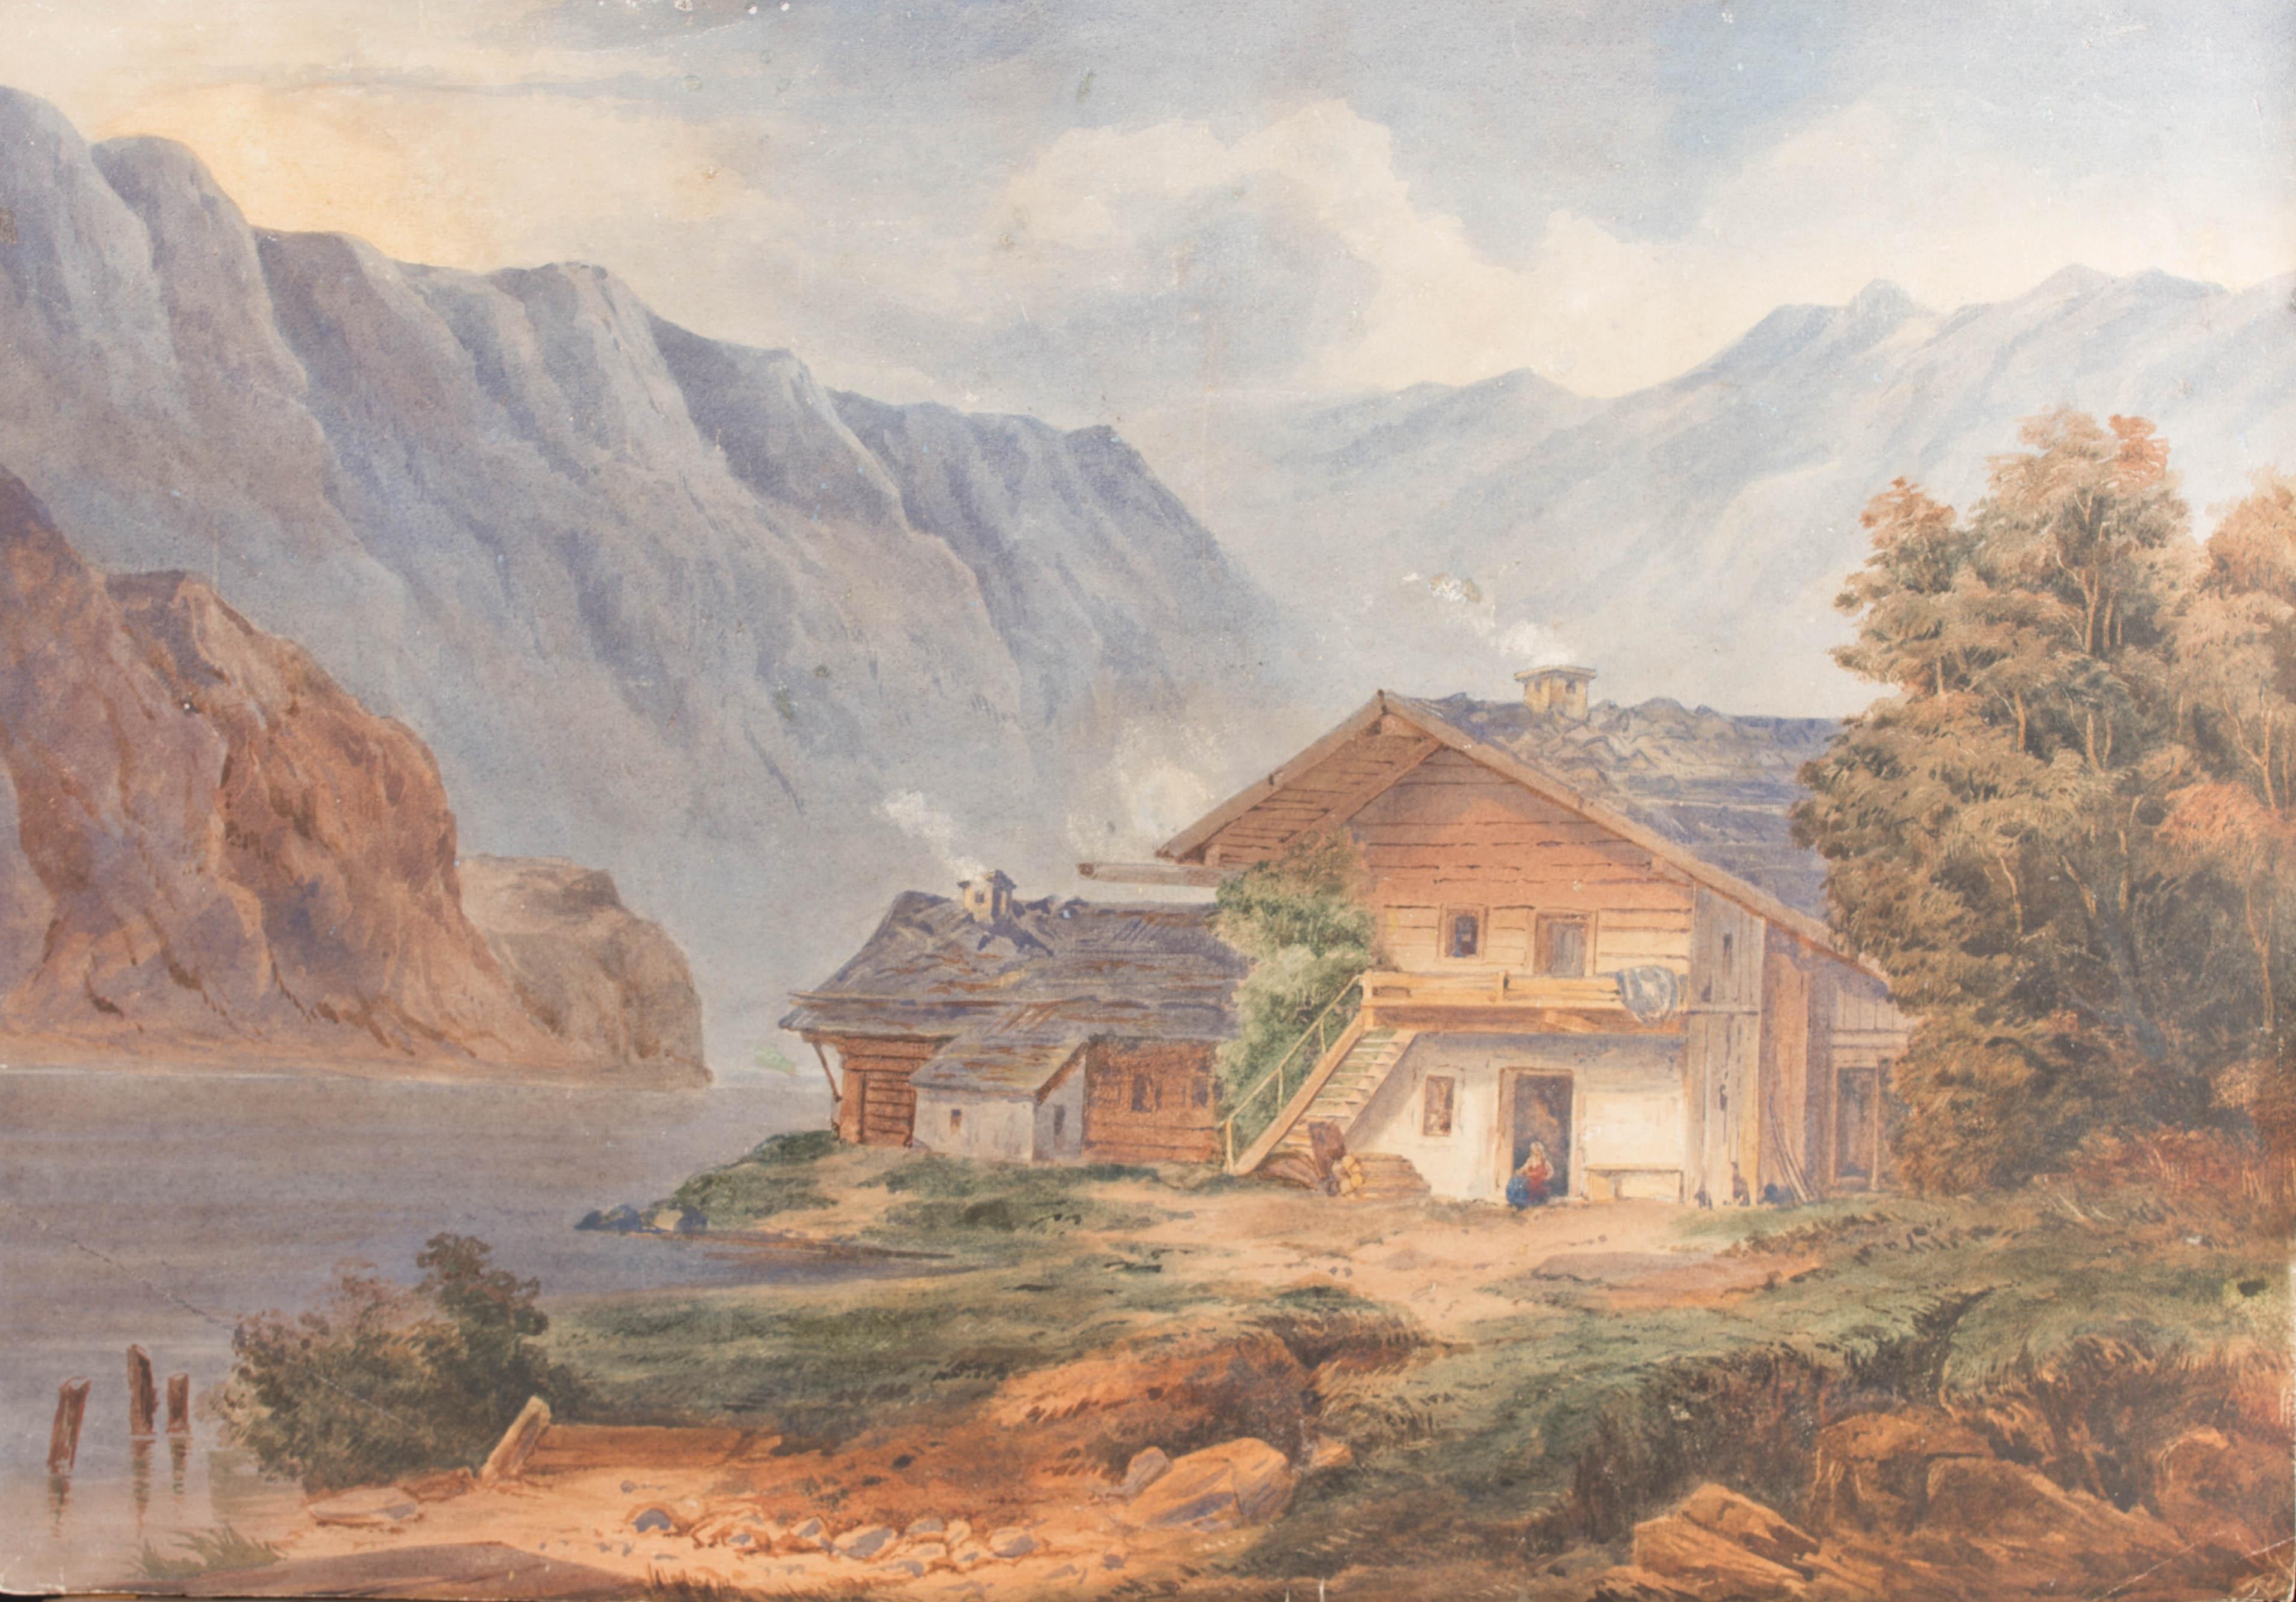 A very fine 19th century watercolour landscape depicting a quaint cottage beside a lake with distant mountains in the distance. The artist is clearly proficient in the medium and has taken great care to create a somewhat idealised depiction of rural